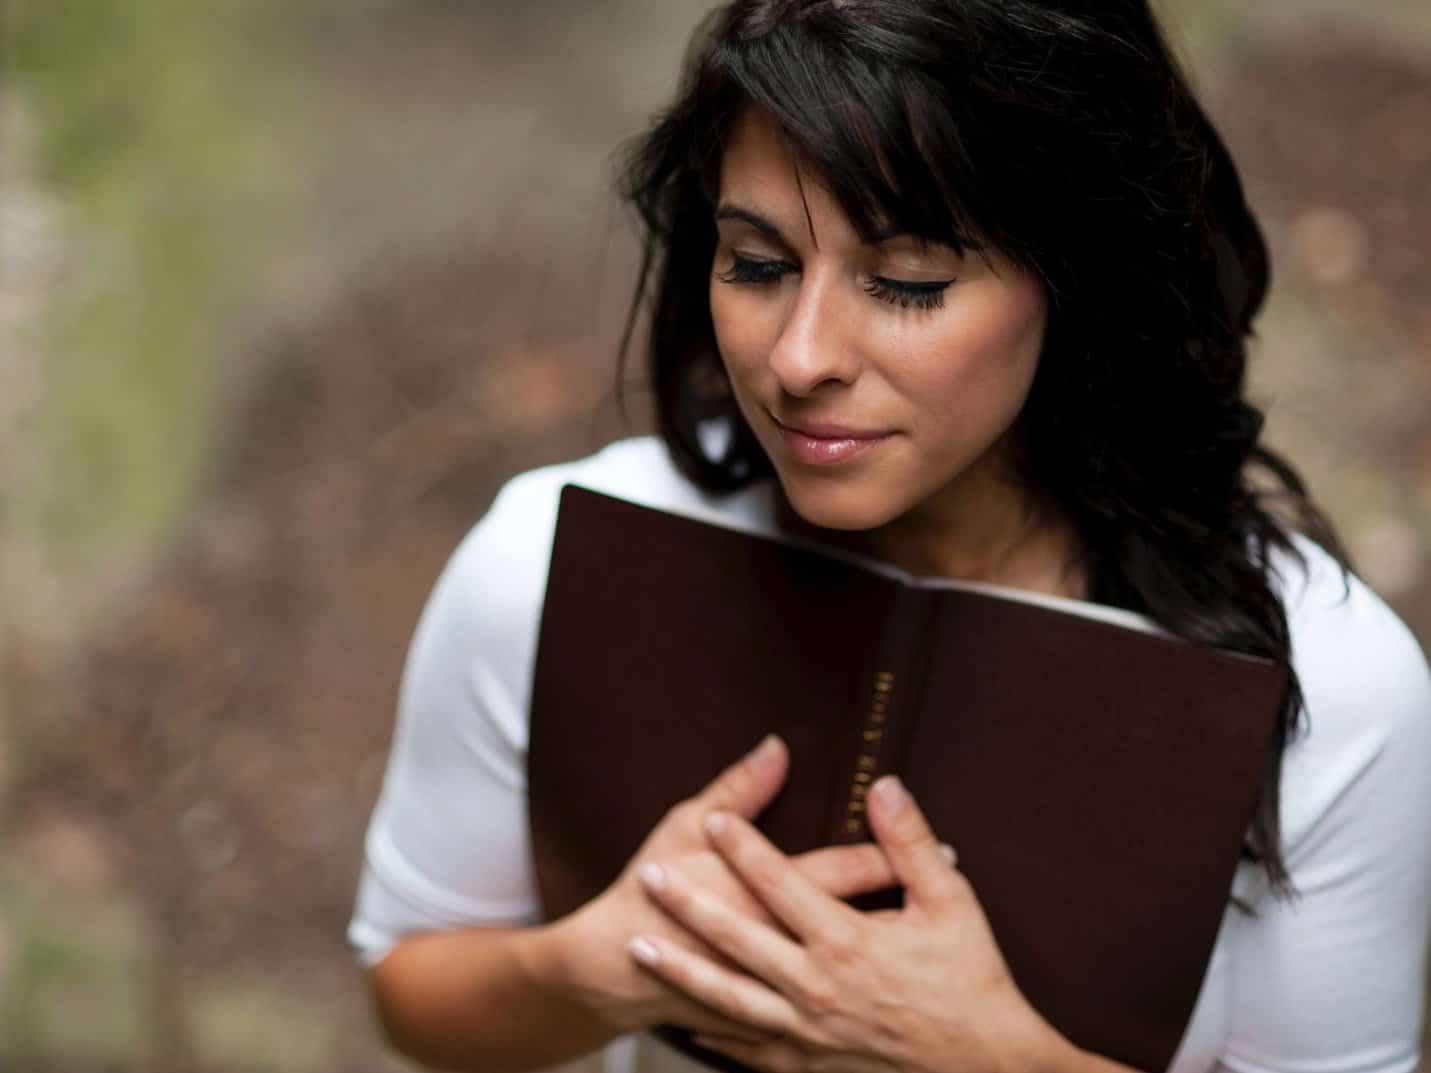 How should you study the Bible alone